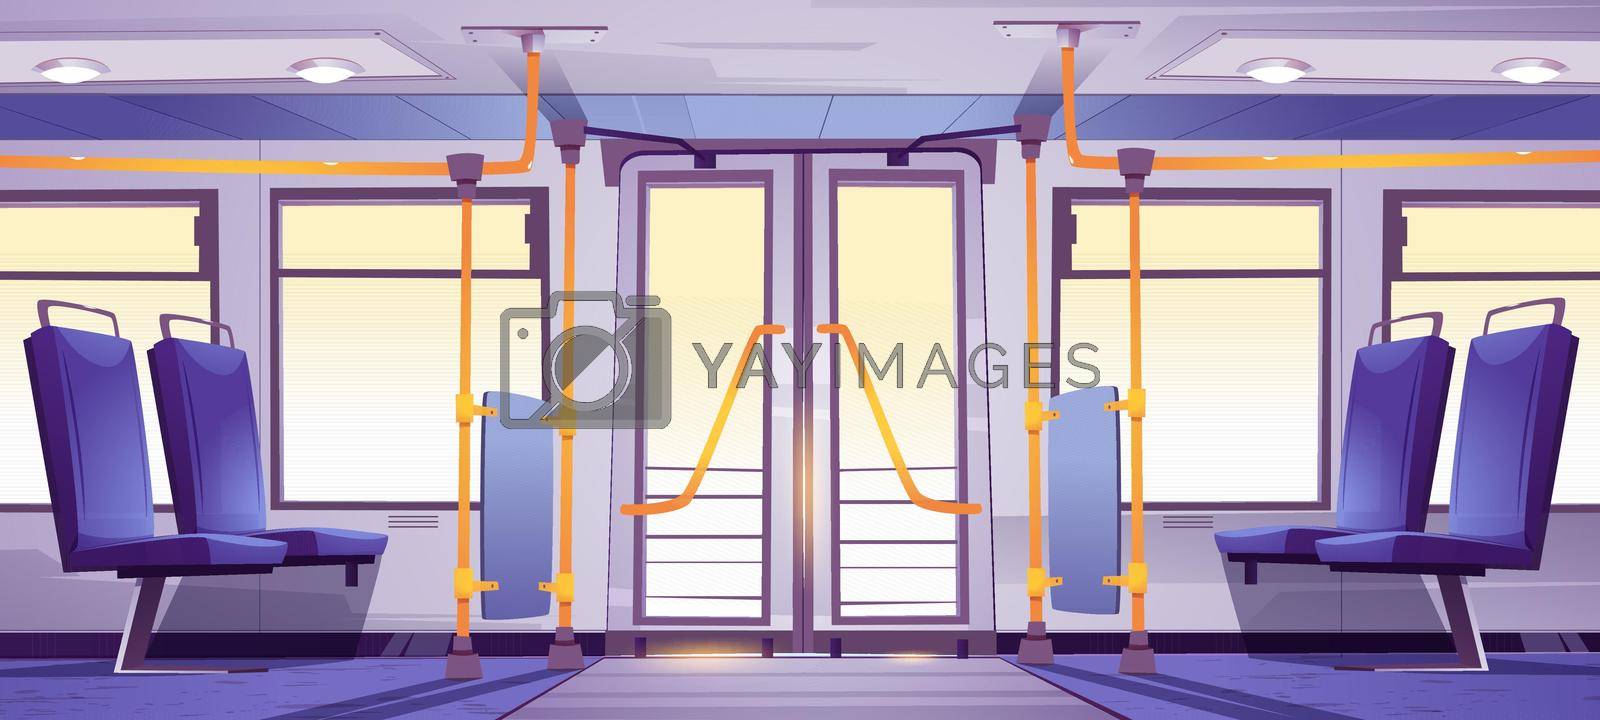 Empty bus interior with seats and handrails. Vector cartoon illustration of public transport cabin inside, passenger vehicle with blue chairs, doors and windows